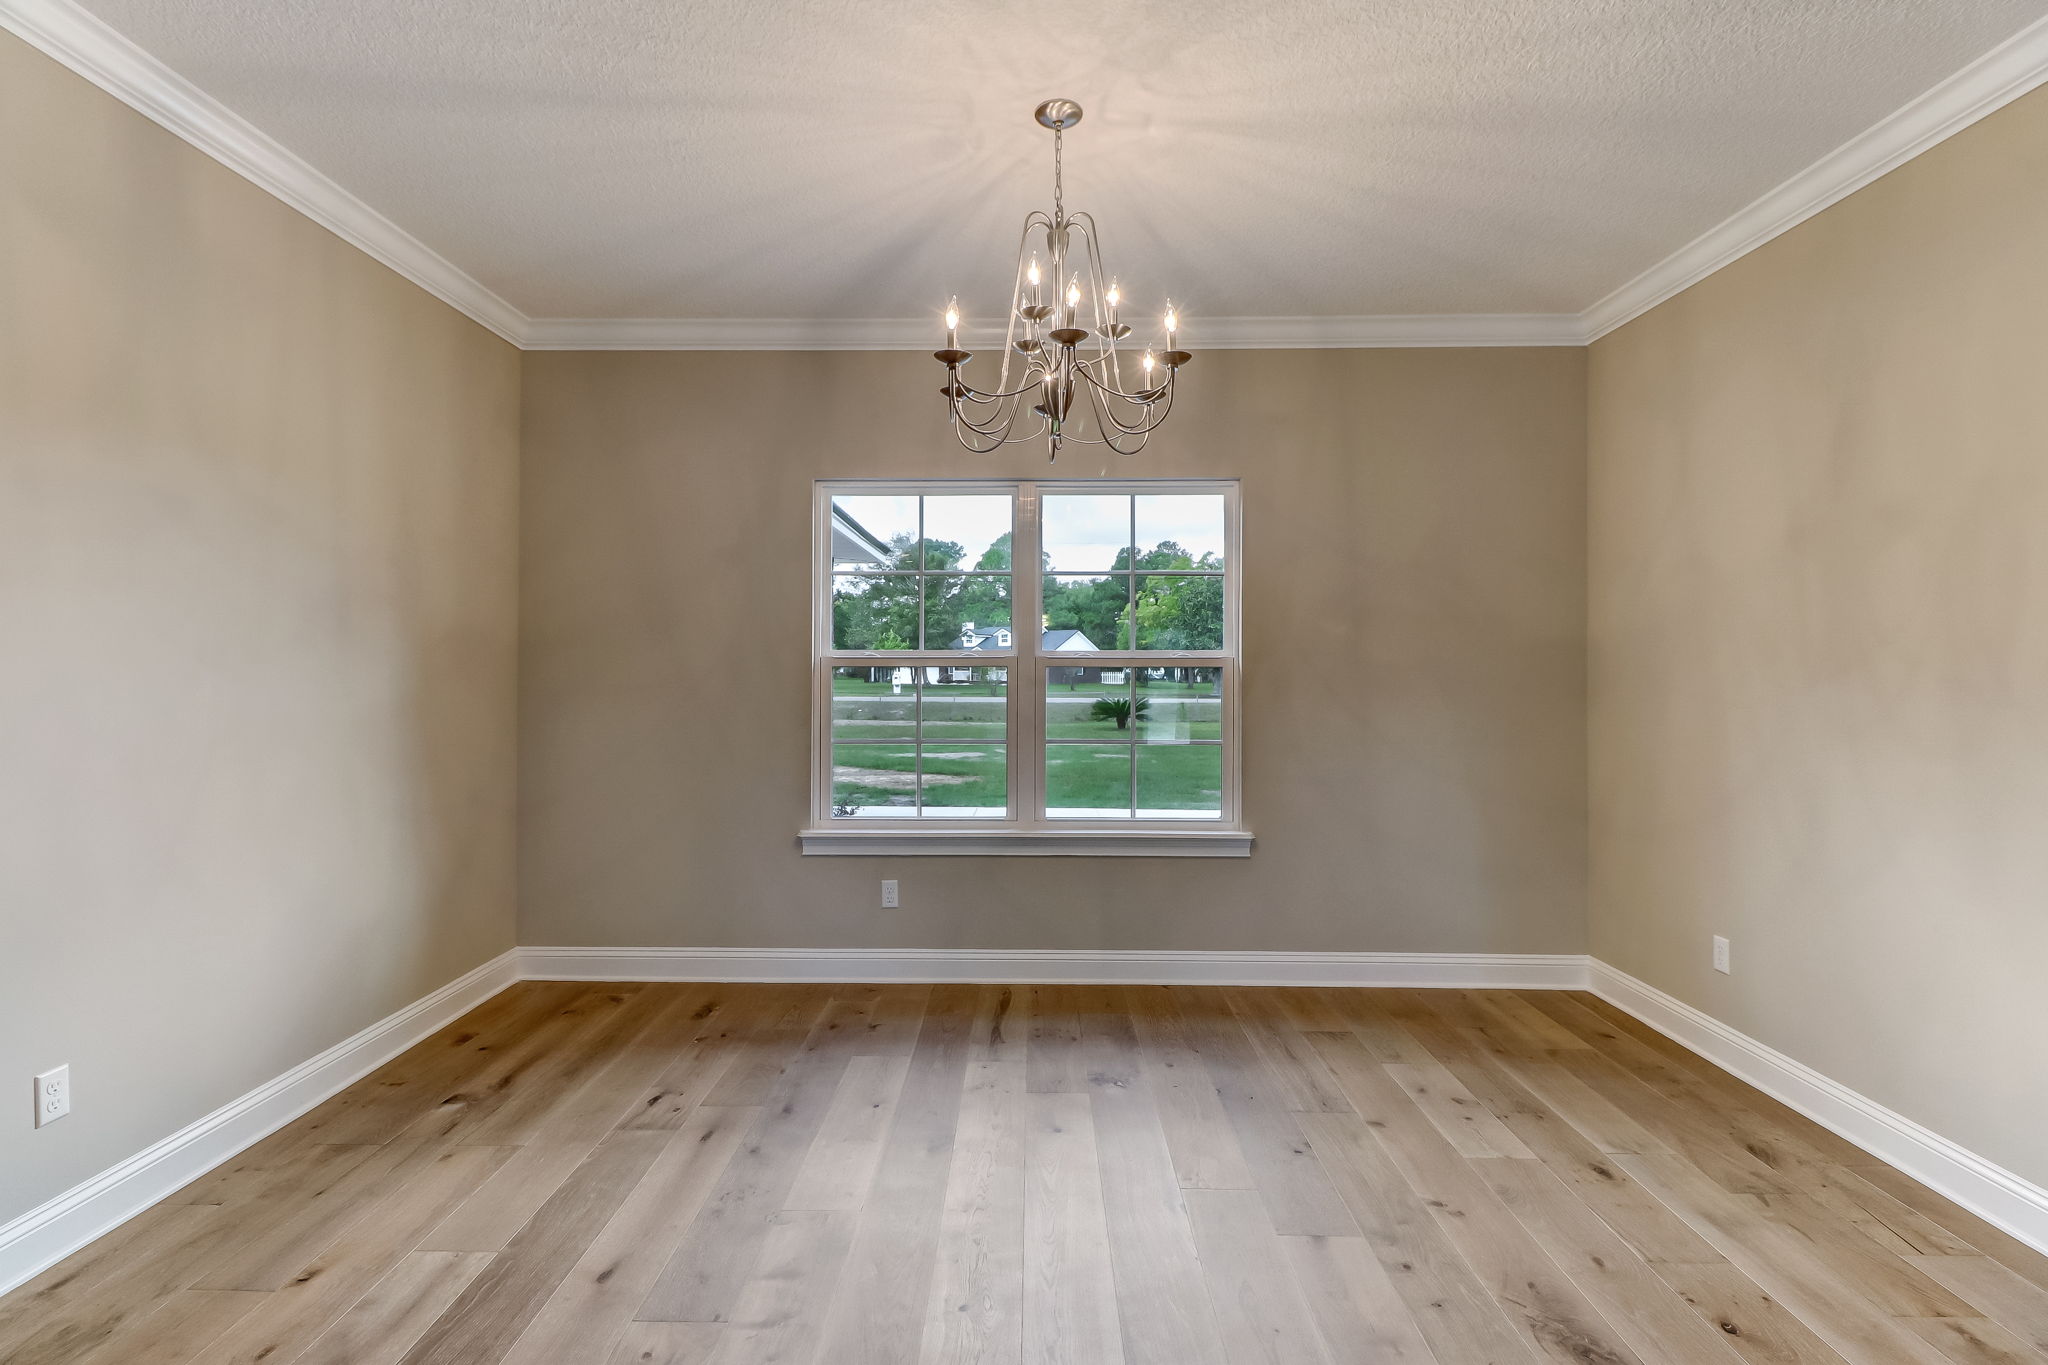 Neutral paint, 9 ft ceilings, and crown moulding add a special touch to the open concept living and dining area.